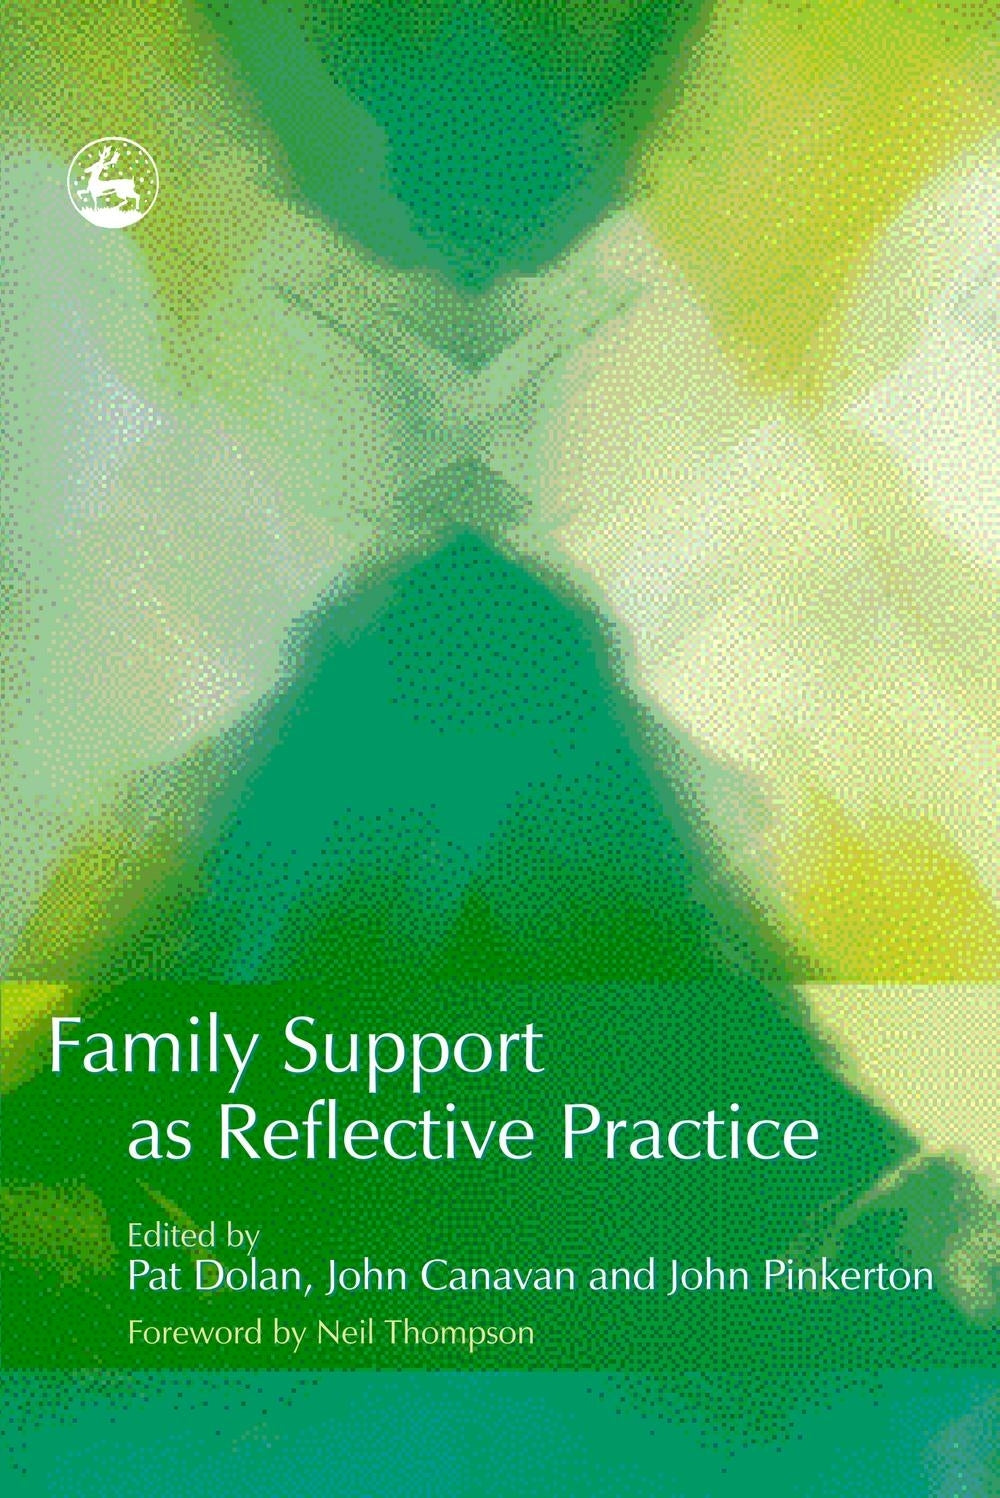 Family Support as Reflective Practice by Pat Dolan, John Canavan, Neil Thompson, John Pinkerton, No Author Listed